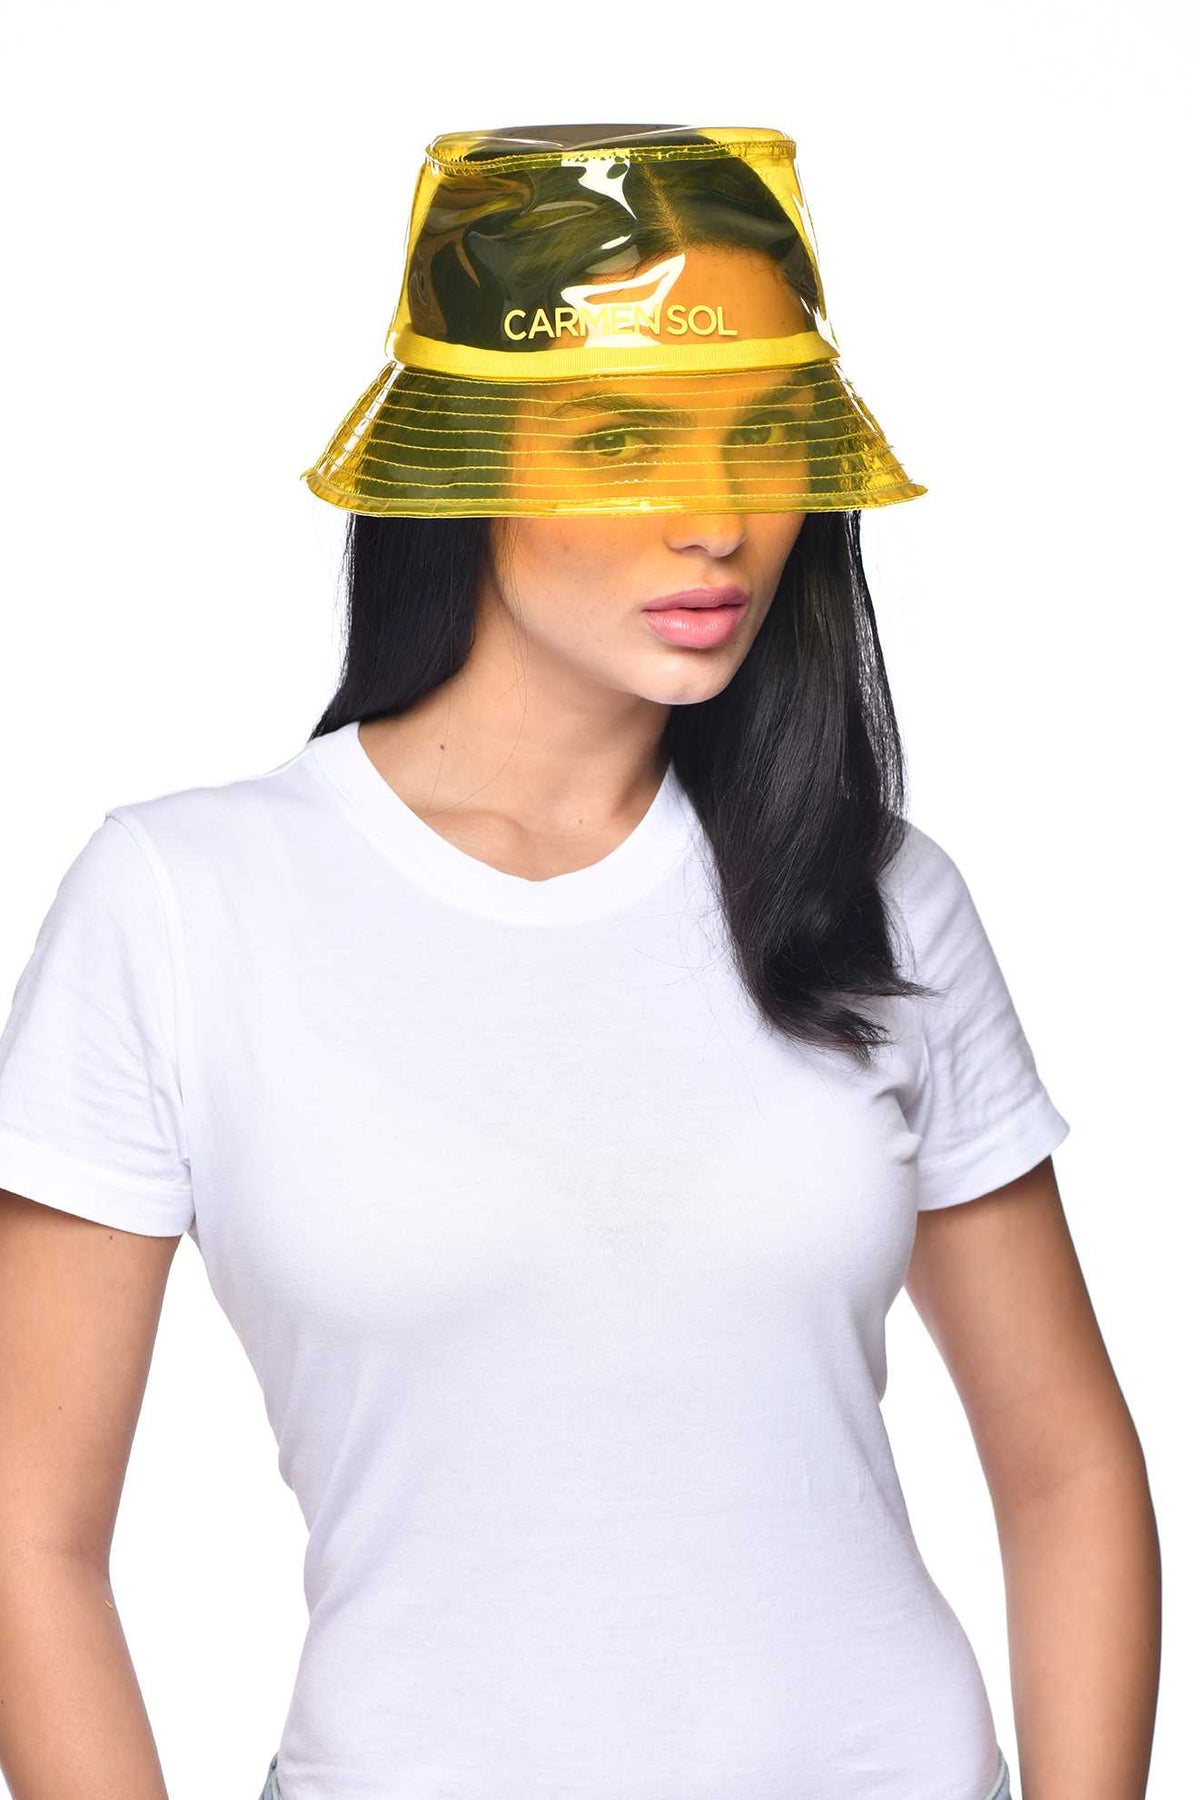 Women wearing made in Italy sun hat in color yellow from Carmen Sol